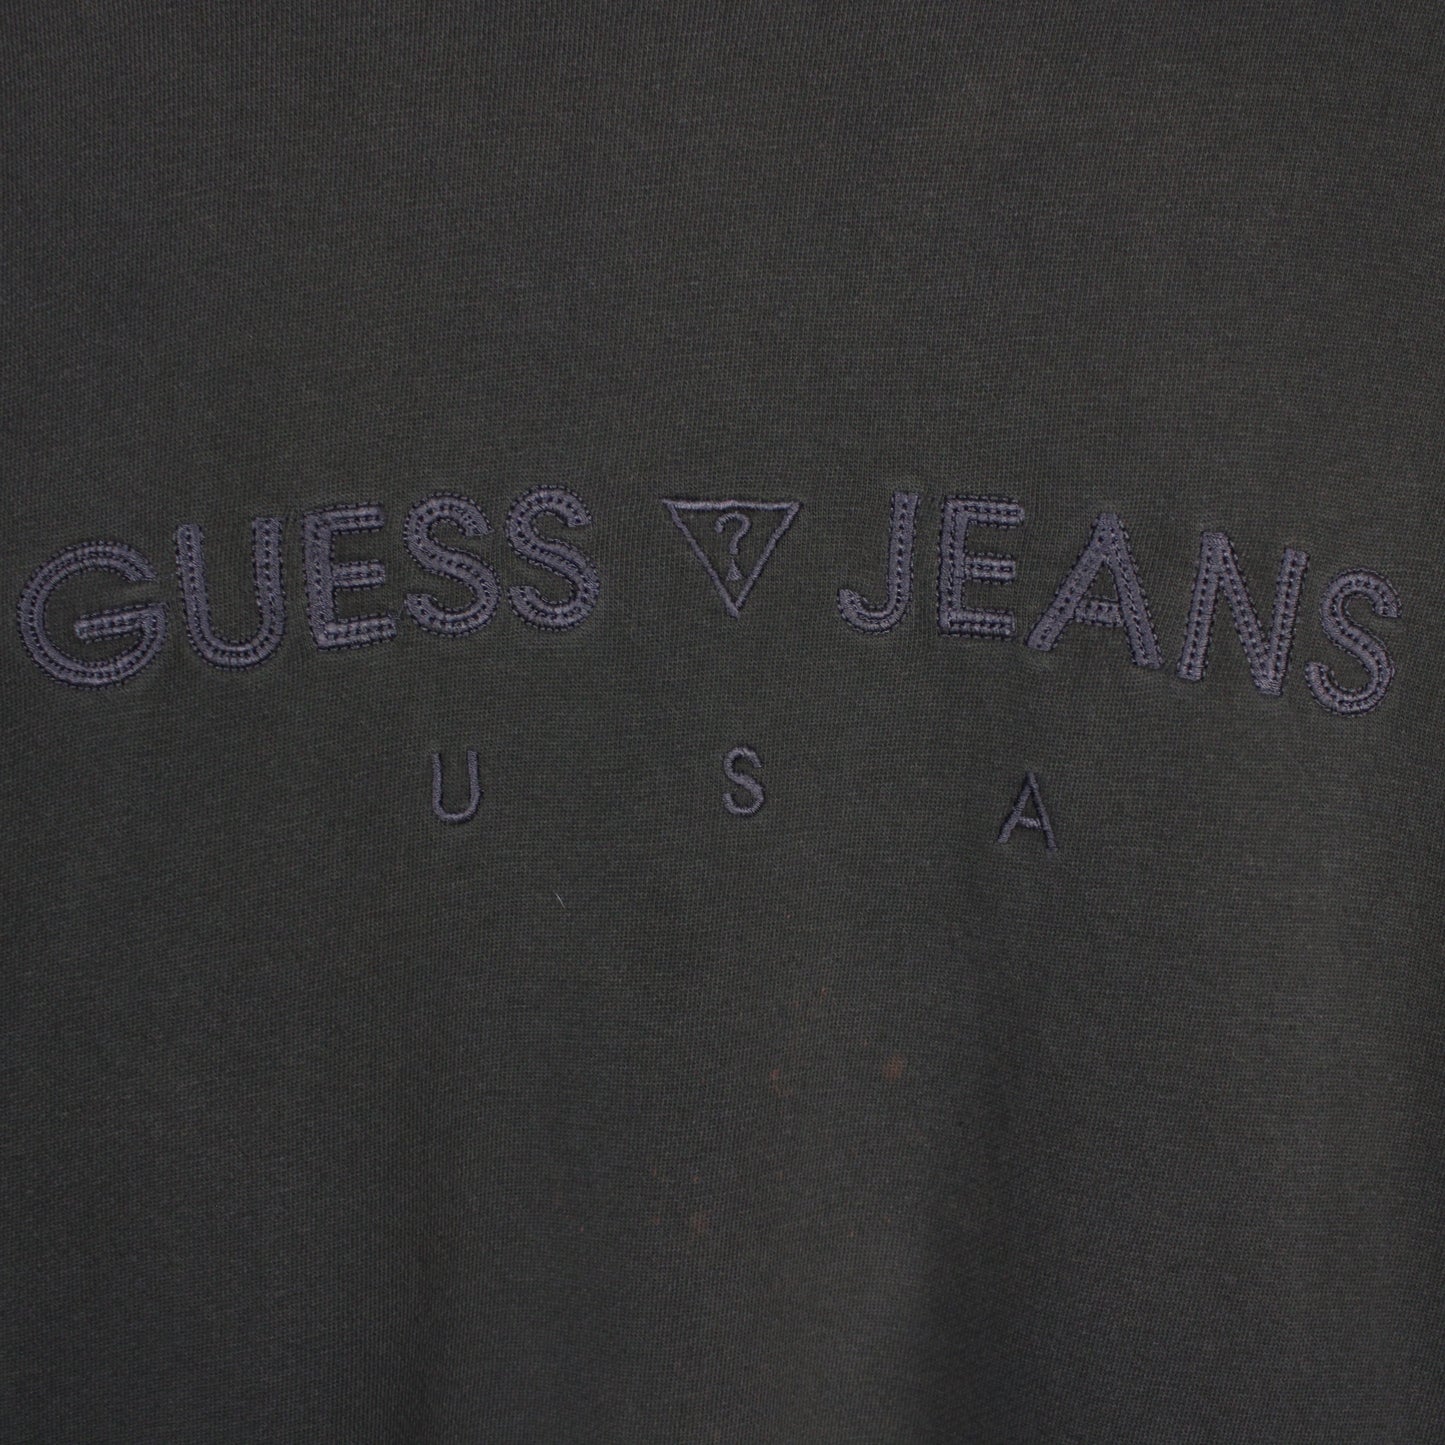 Vintage Guess Jeans USA Embroidered Sweatshirt - L